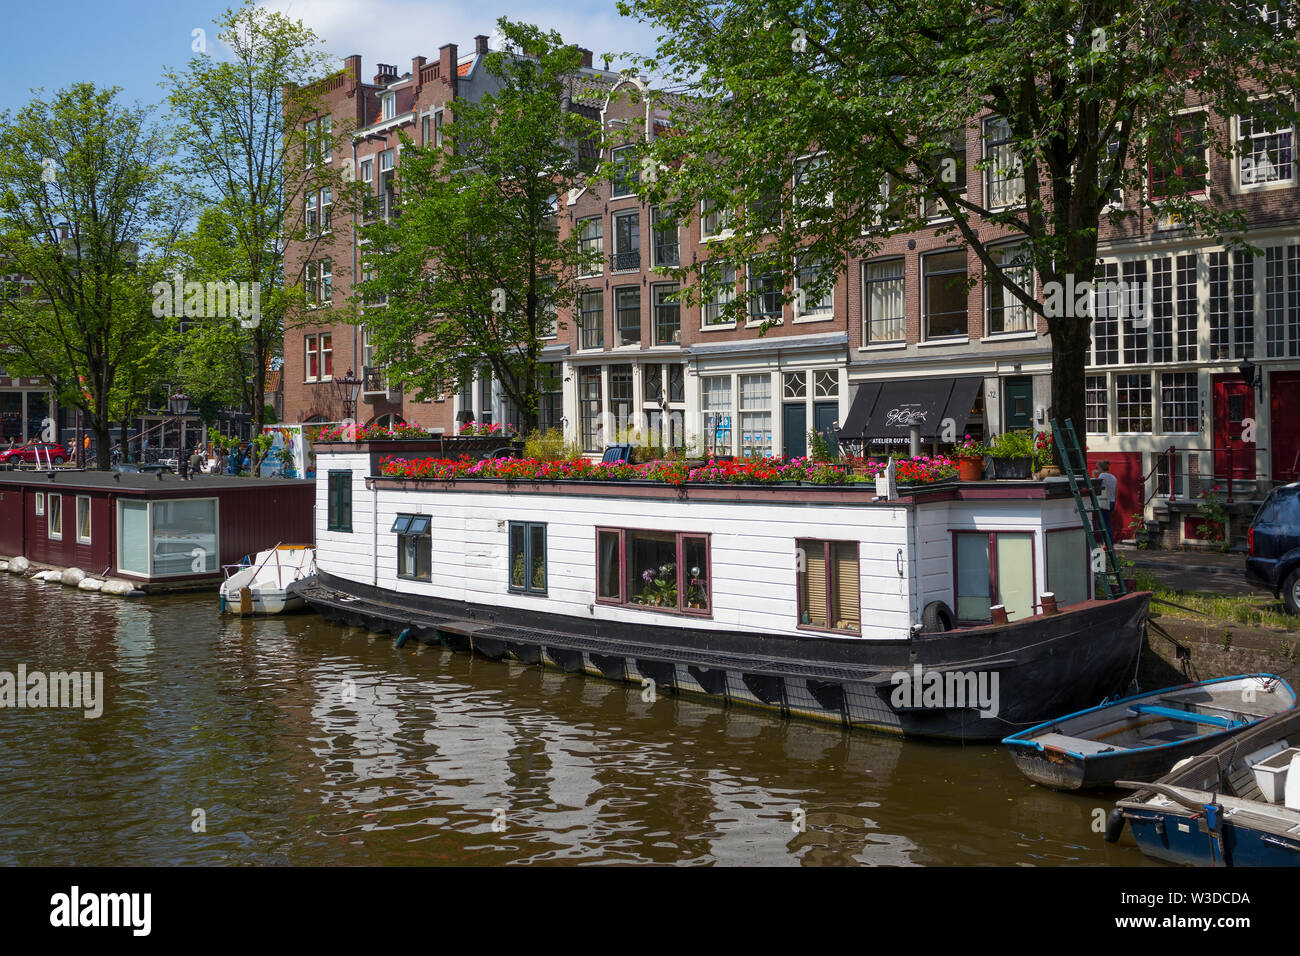 Amsterdam, Holland - June 22, 2019: Houseboat with flowers on the canal at the Korte Prinsengracht Stock Photo